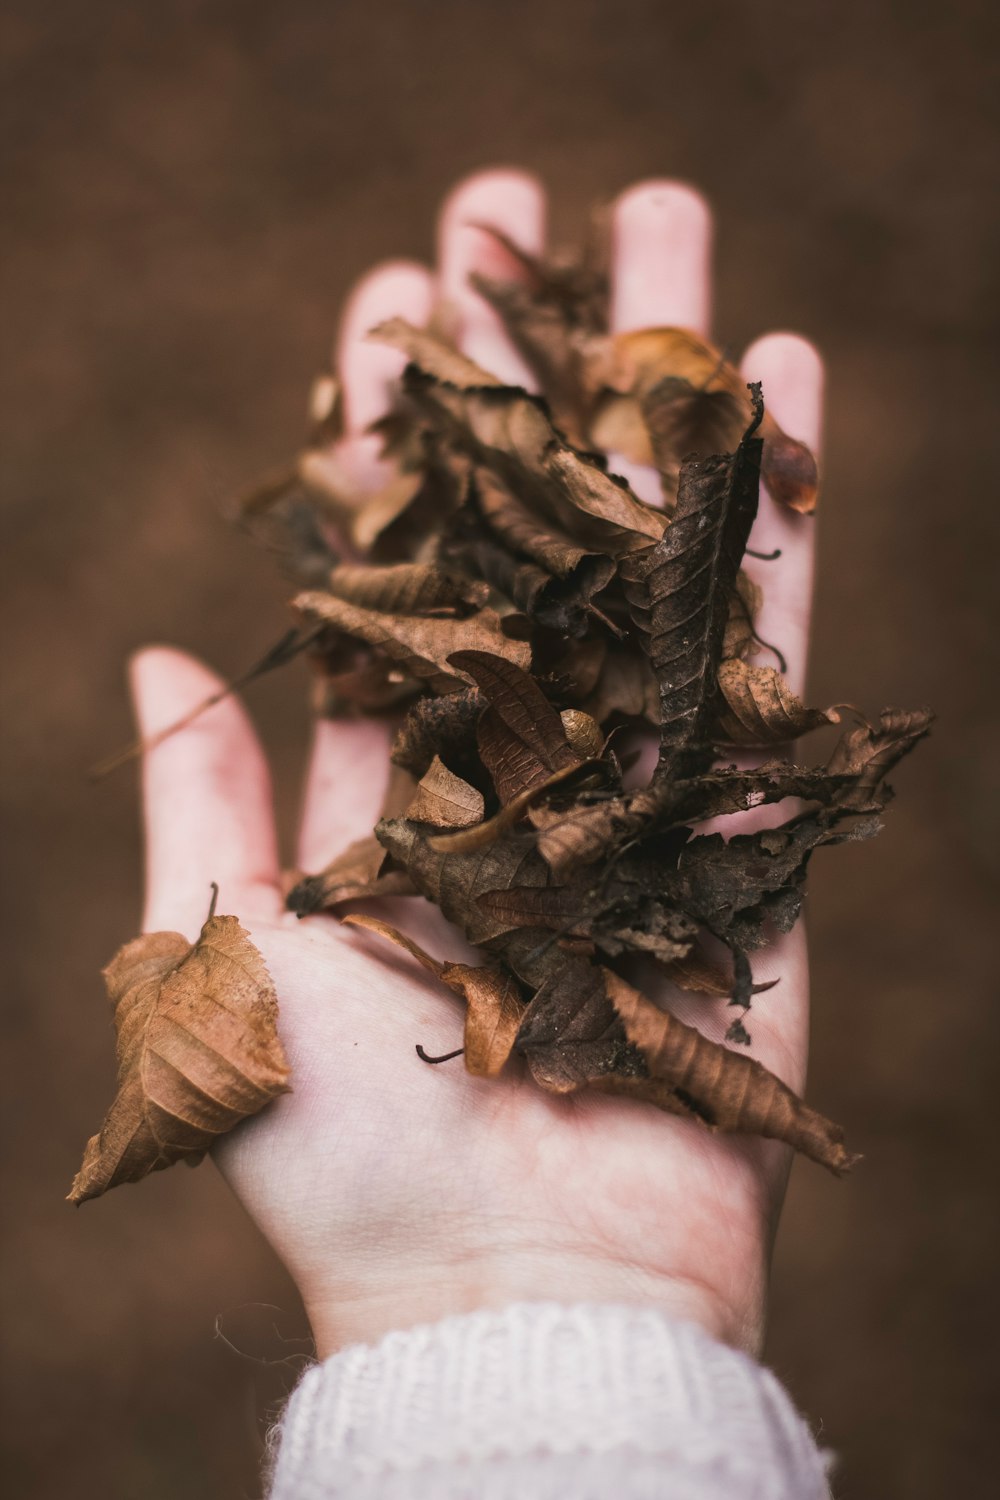 dried leaves in person's palm